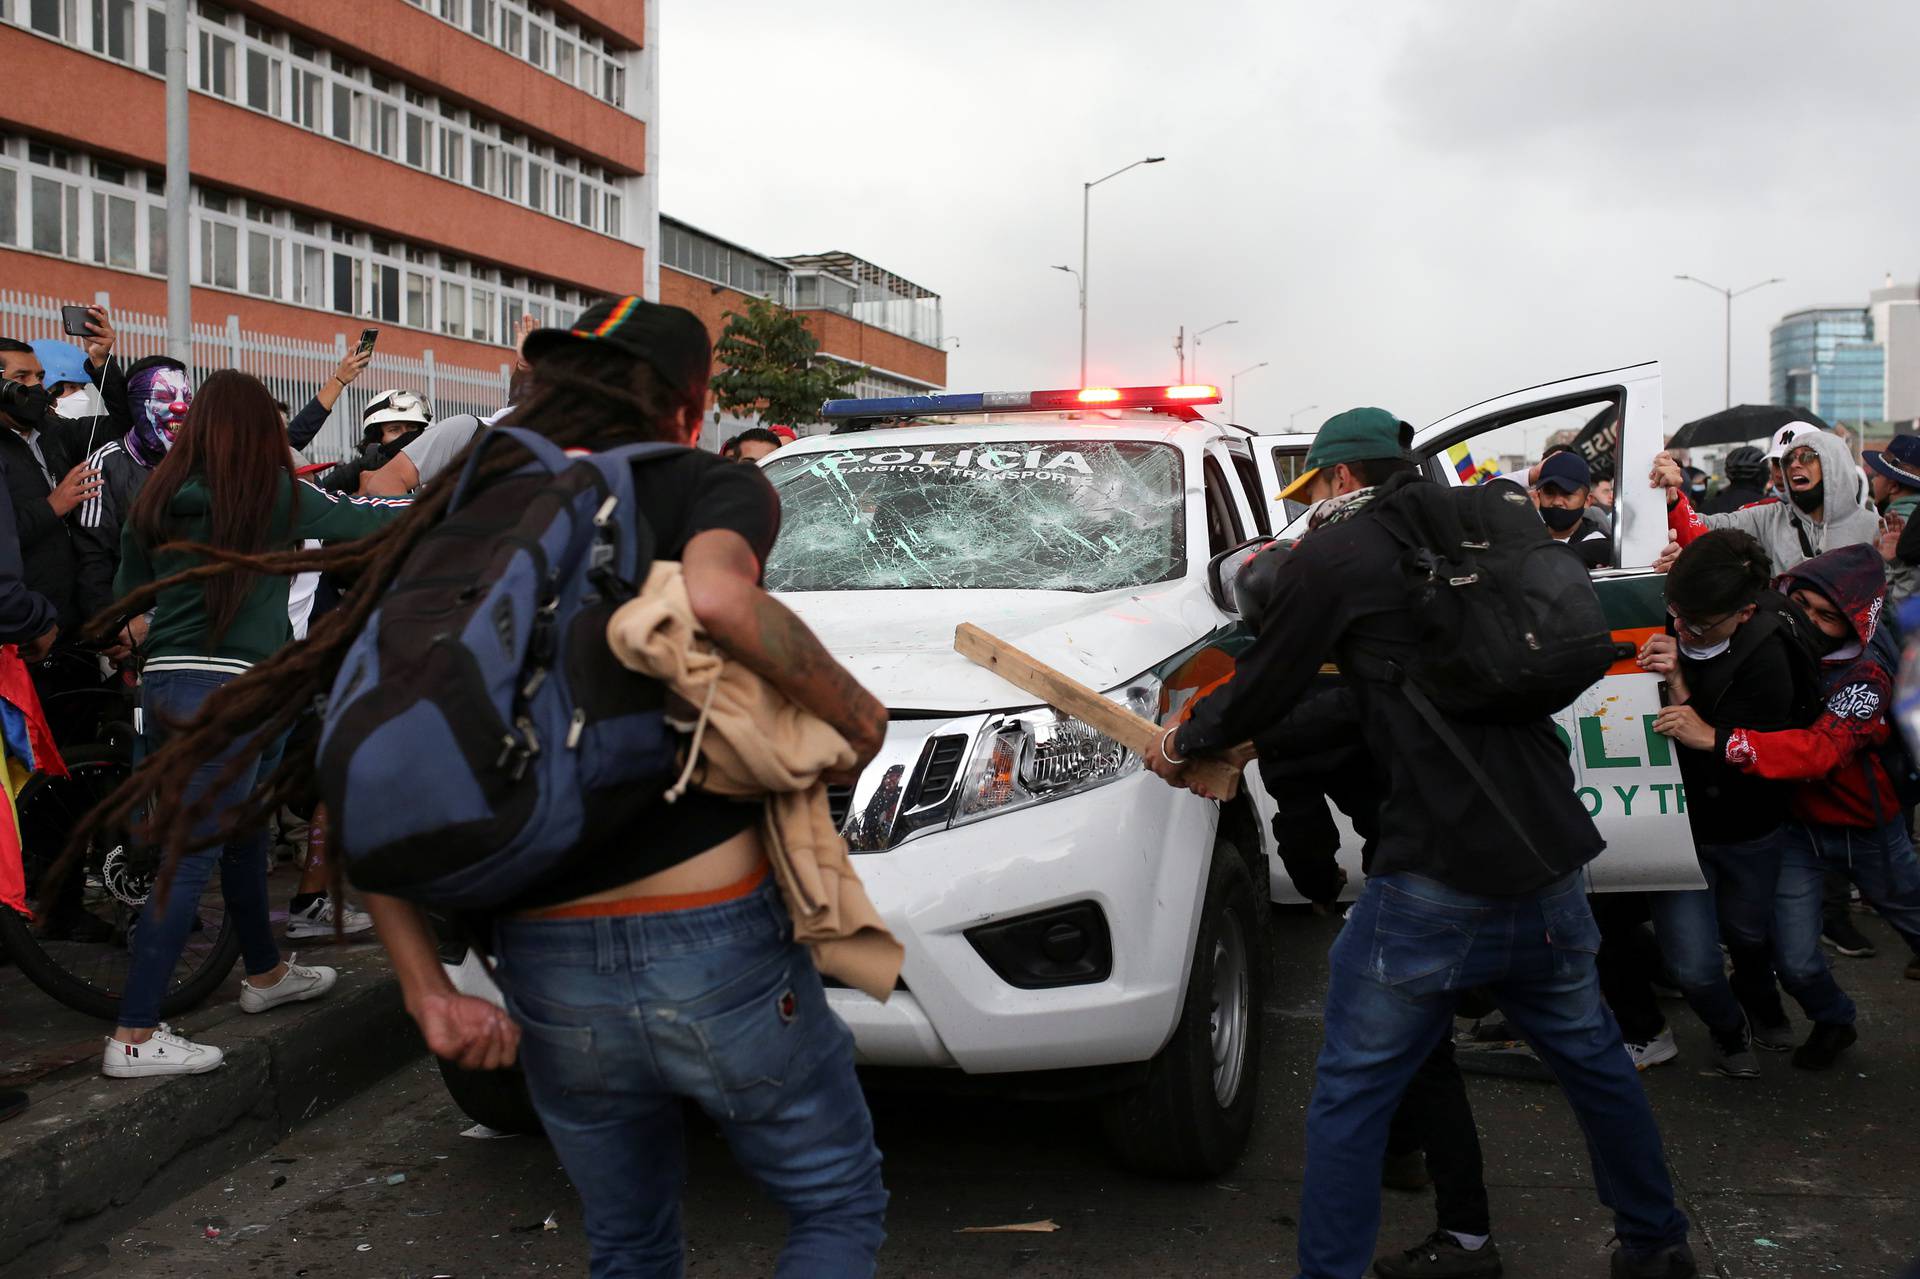 Protest against the tax reform in Bogota